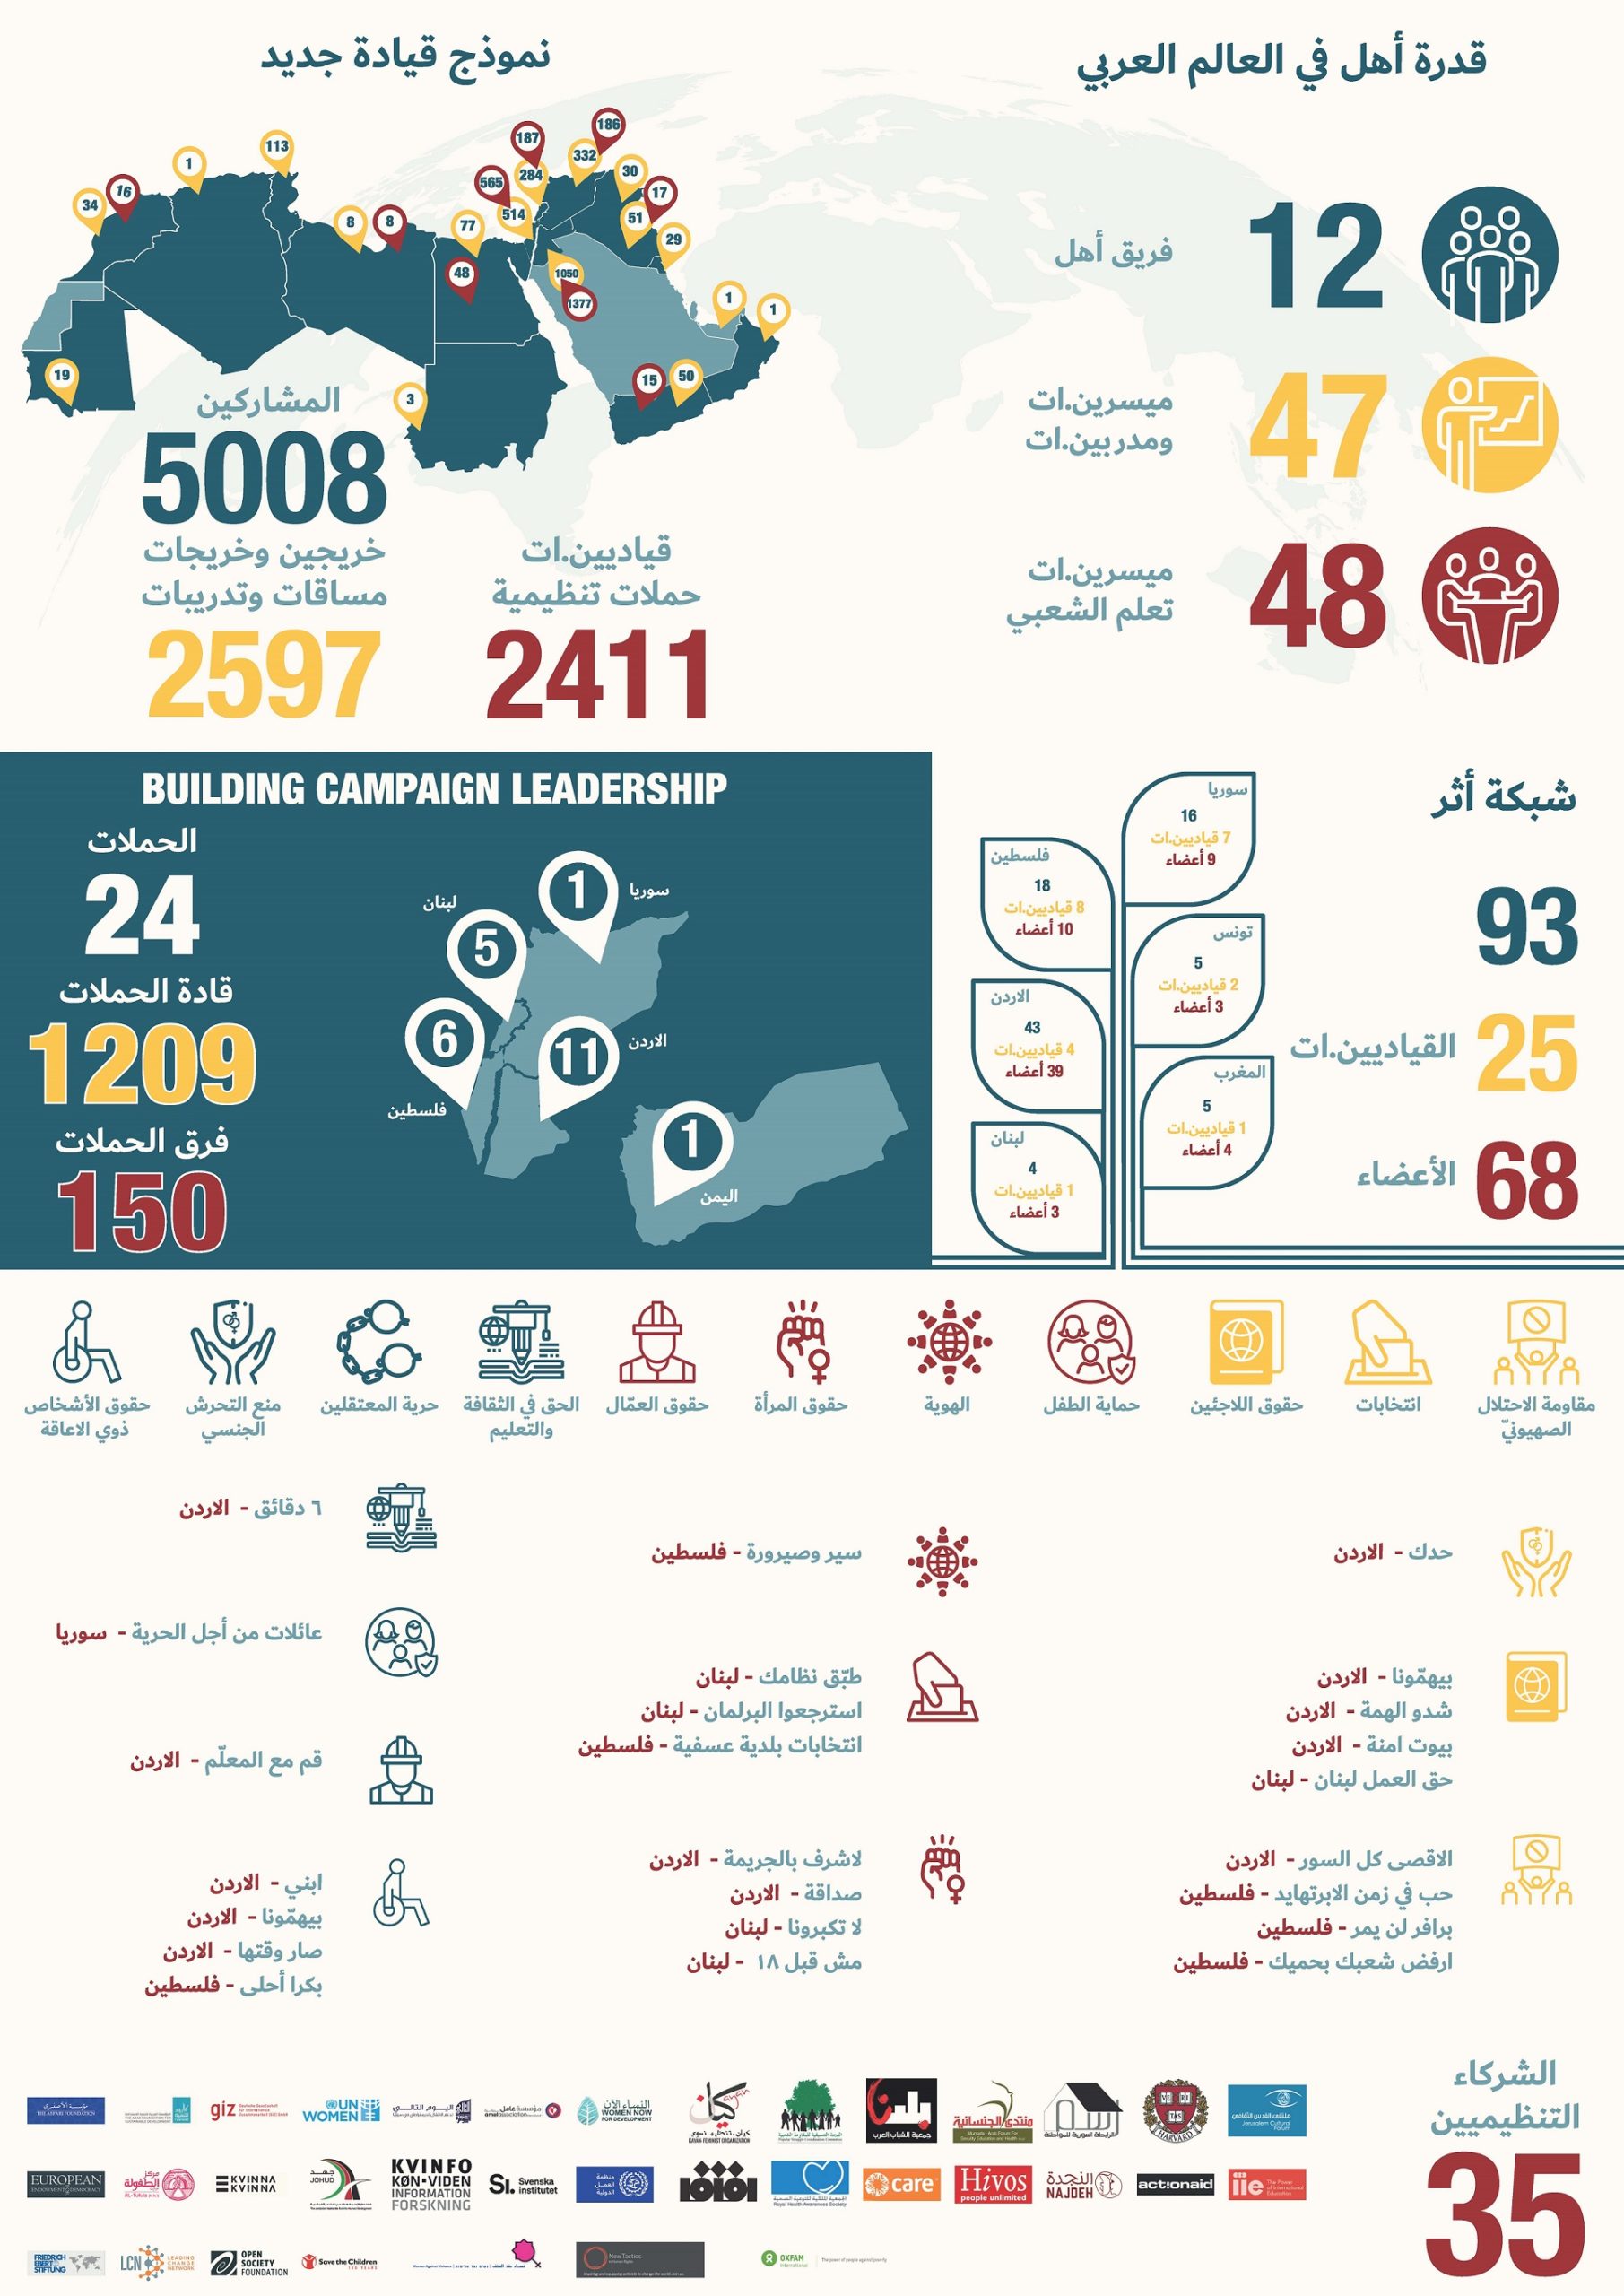 https://ahel.org/wp-content/uploads/2021/12/A2-Infographic-Arabic-1-scaled.jpg